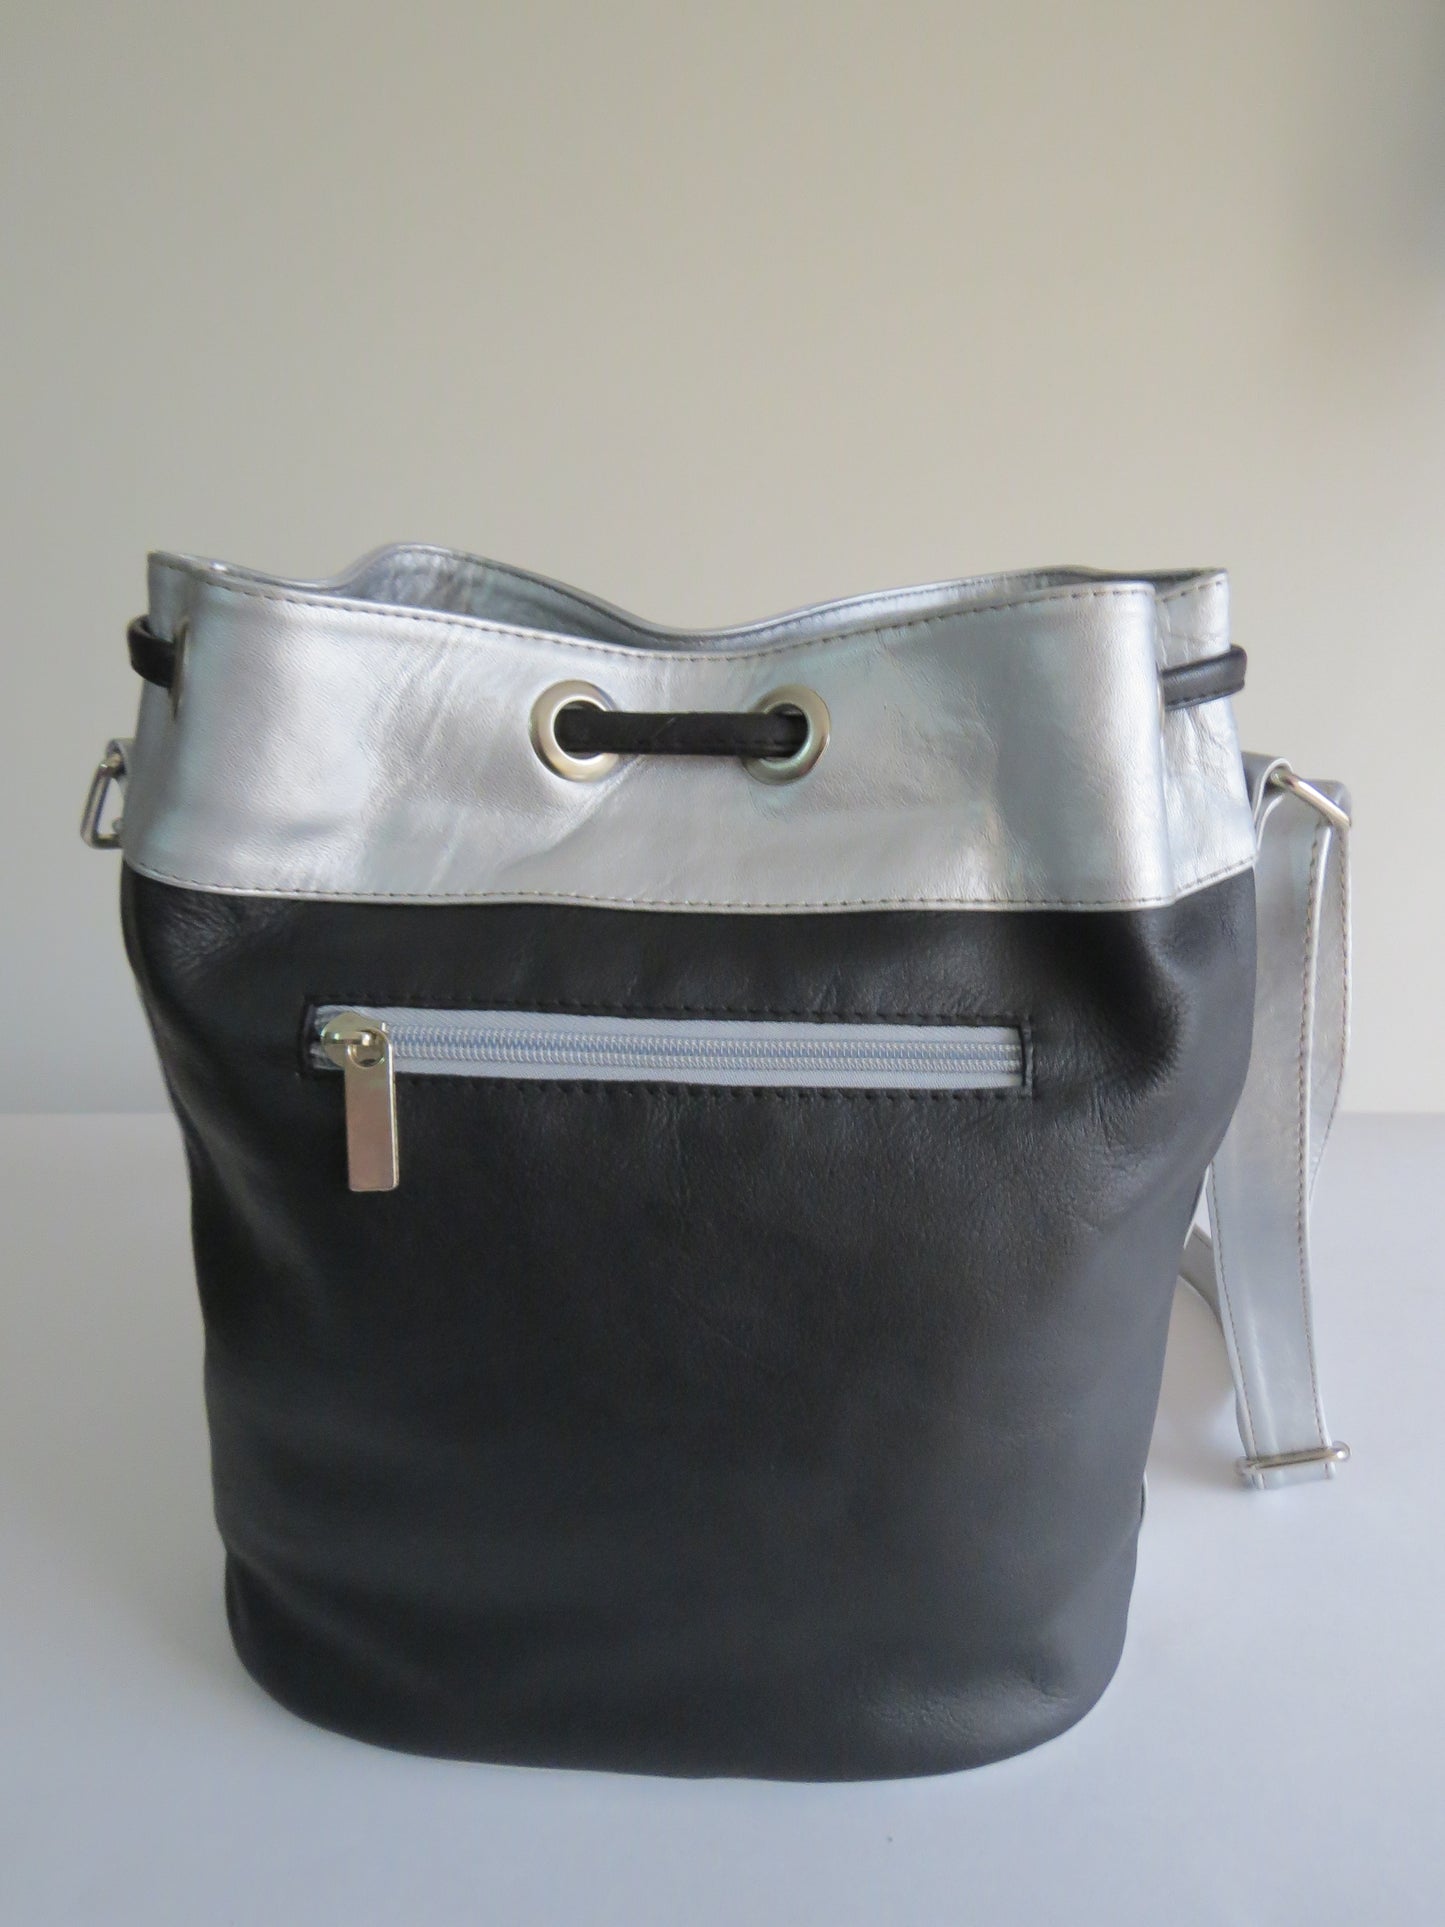 Silver and Black Purse, Large Leather Bag